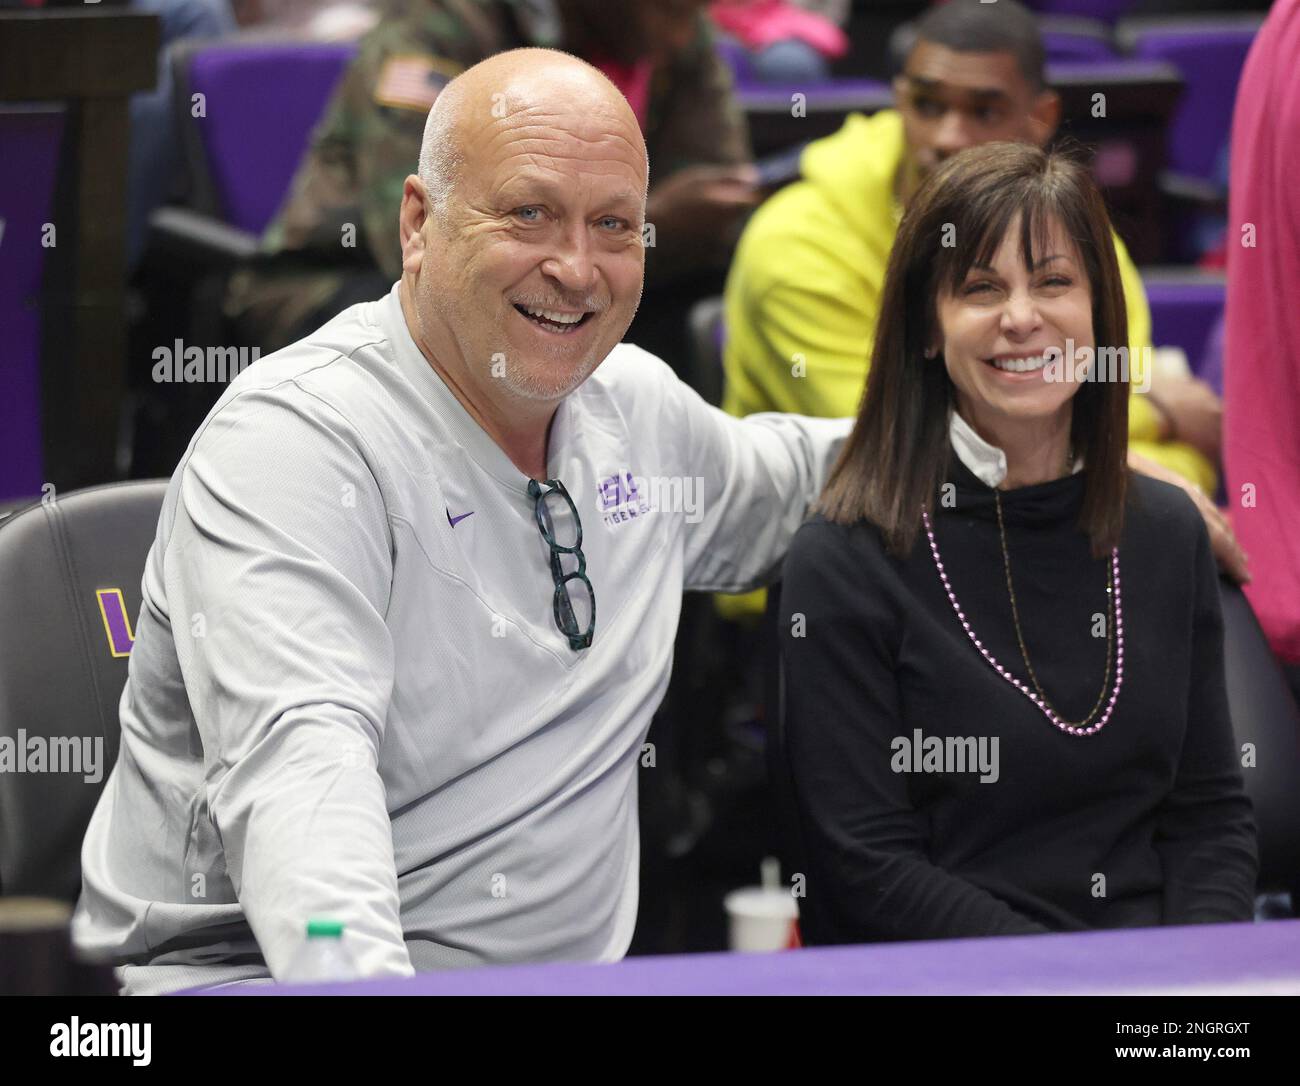 Baton Rouge, USA. 16th Feb, 2023. Baseball Hall of Famer Cal Ripken Jr. poses with his wife Laura during a women's college basketball game at the Pete Maravich Assembly Center in Baton Rouge, Louisiana on Thursday, February 16, 2022. (Photo by Peter G. Forest/Sipa USA) Credit: Sipa USA/Alamy Live News Stock Photo